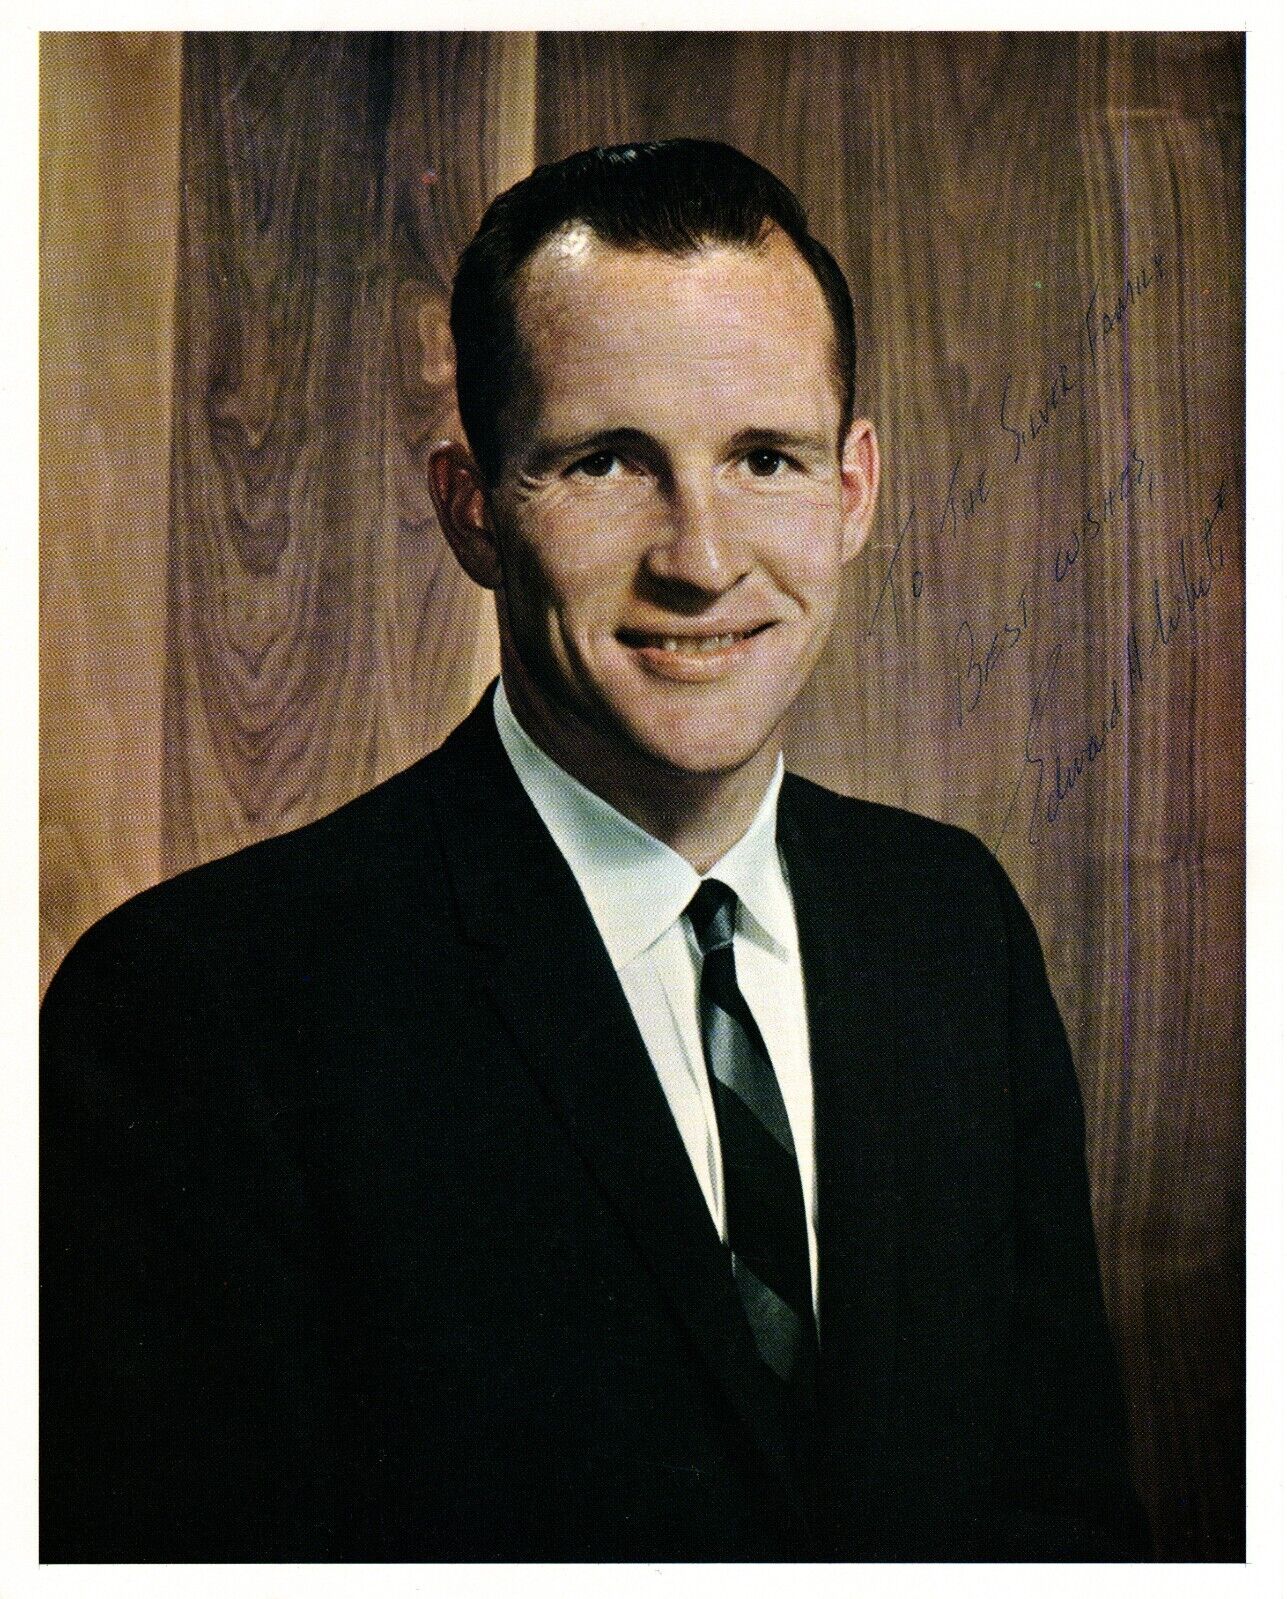 Edward H. White II - Photograph Signed - Inscribed to Apollo Missions Geologist